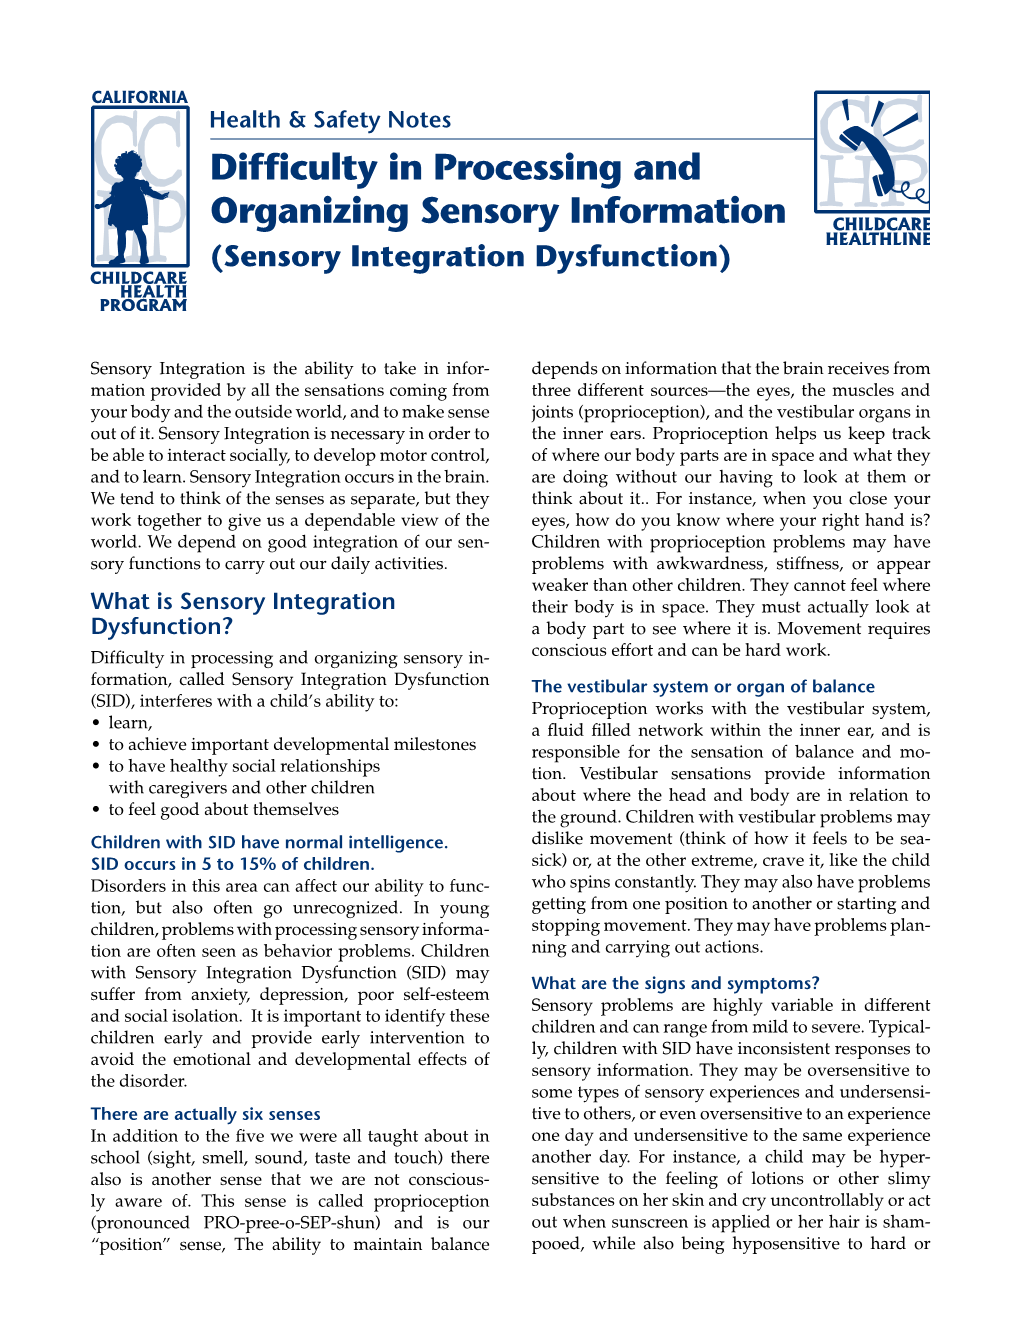 Difficulty in Processing and Organizing Sensory Information (Sensory Integration Dysfunction)